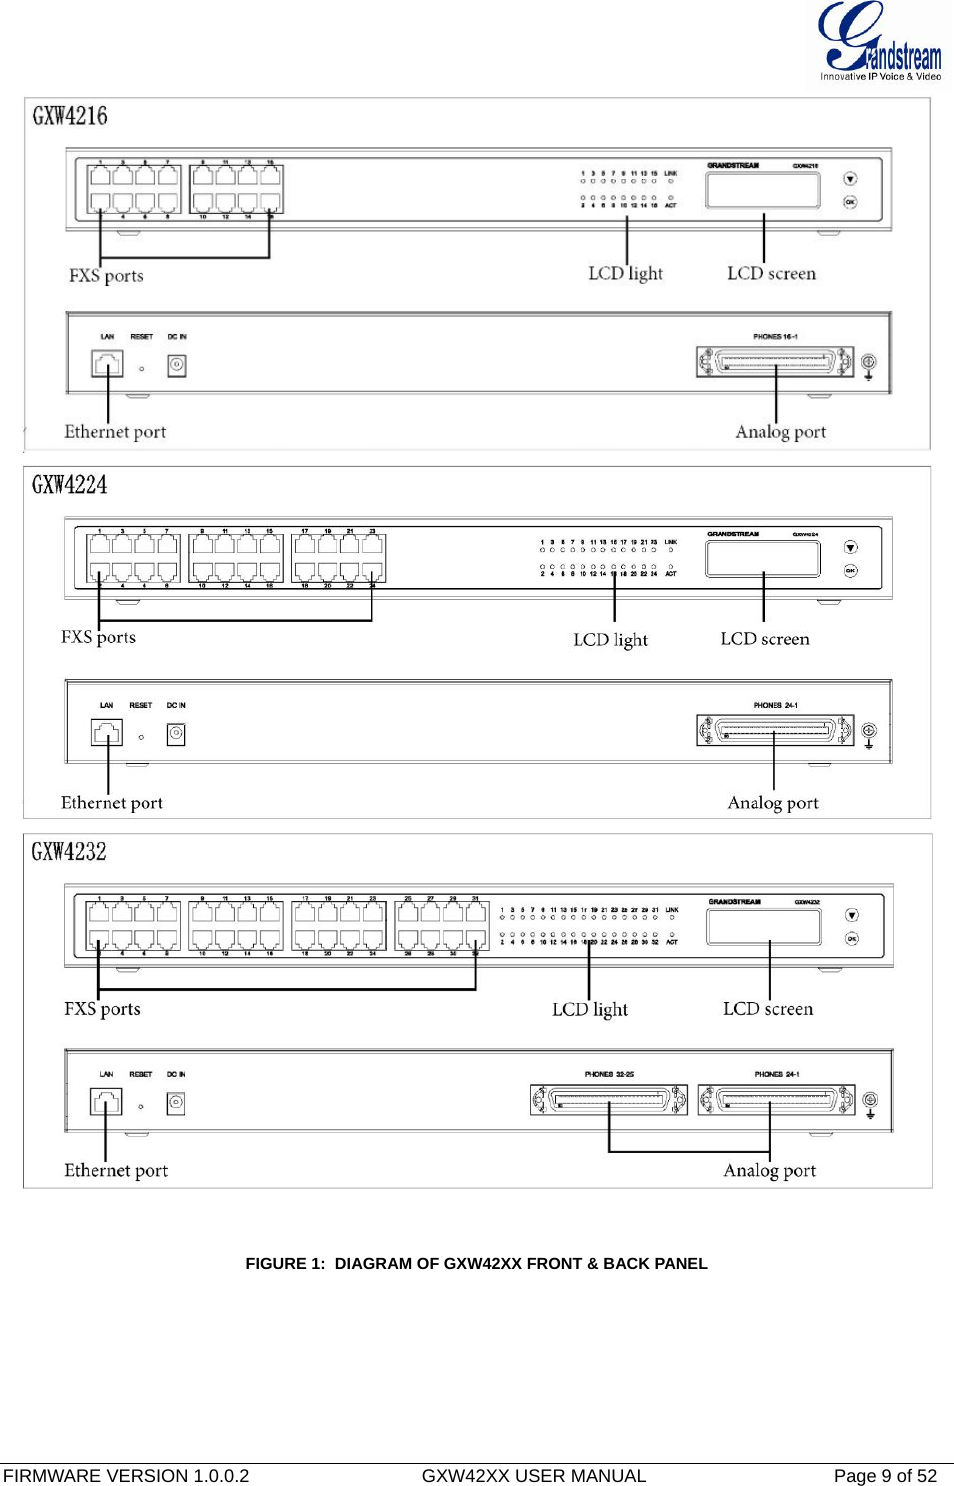  FIRMWARE VERSION 1.0.0.2                                  GXW42XX USER MANUAL                                     Page 9 of 52        FIGURE 1:  DIAGRAM OF GXW42XX FRONT &amp; BACK PANEL         